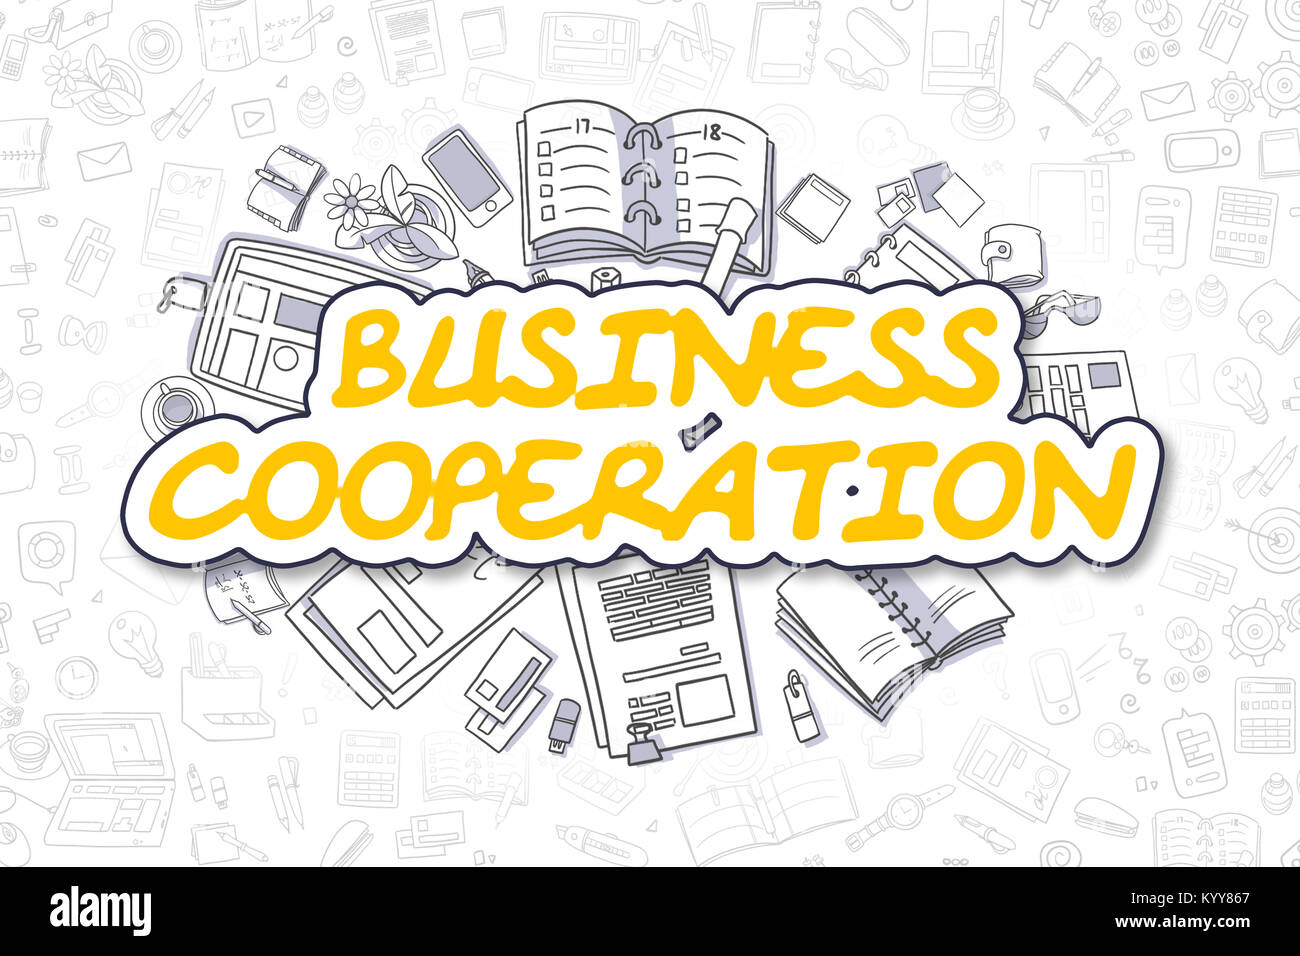 Business Cooperation - Doodle Yellow Text. Business Concept. Stock Photo